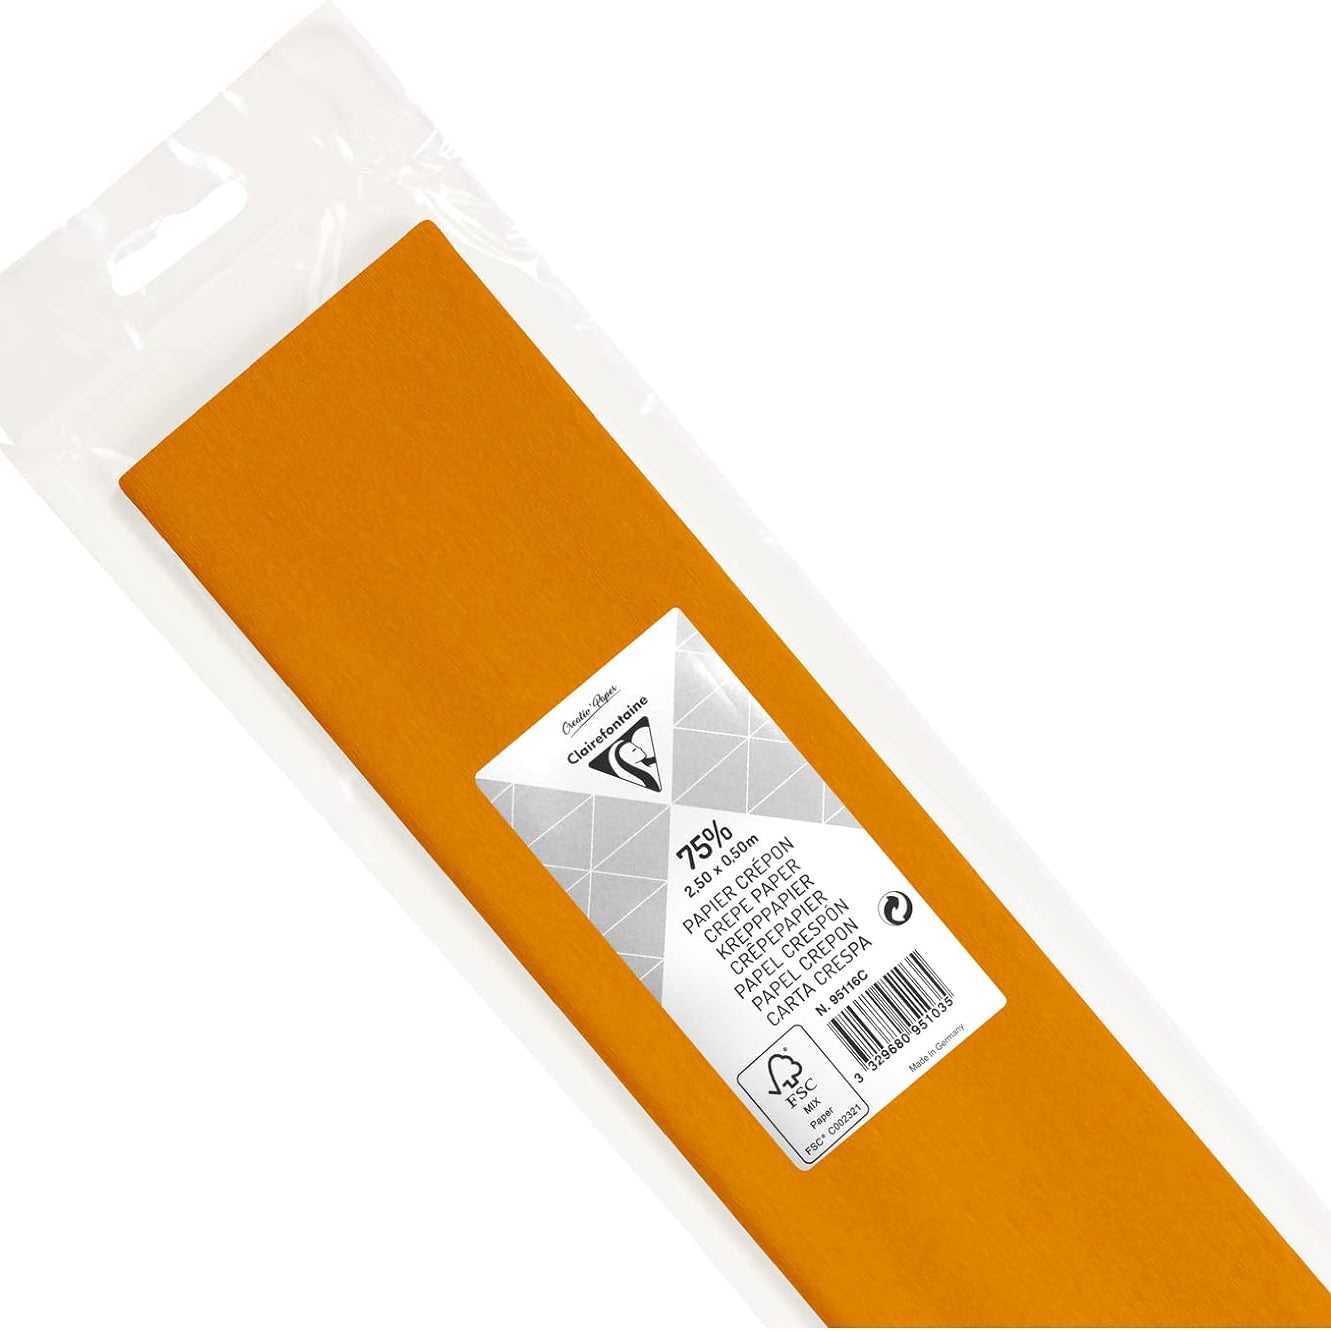 CLAIREFONTAINE Crepe Paper Roll 75% 2.5x0.5M Gold Yellow